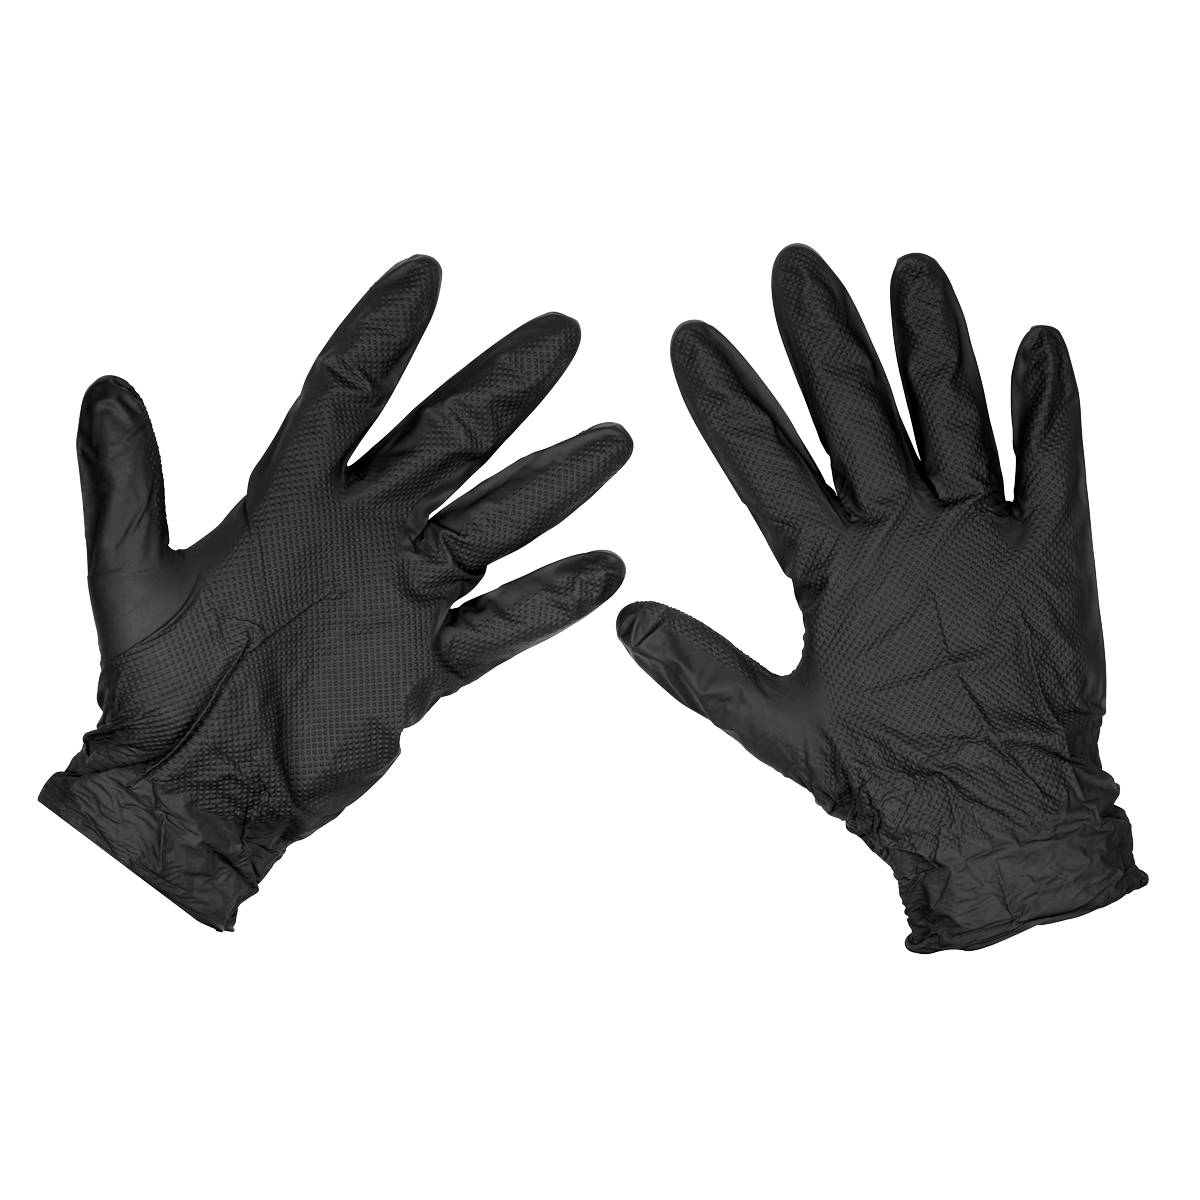 Sealey Black Diamond Grip Extra-Thick Nitrile Powder-Free Gloves Large - Pack of 50 SSP57L